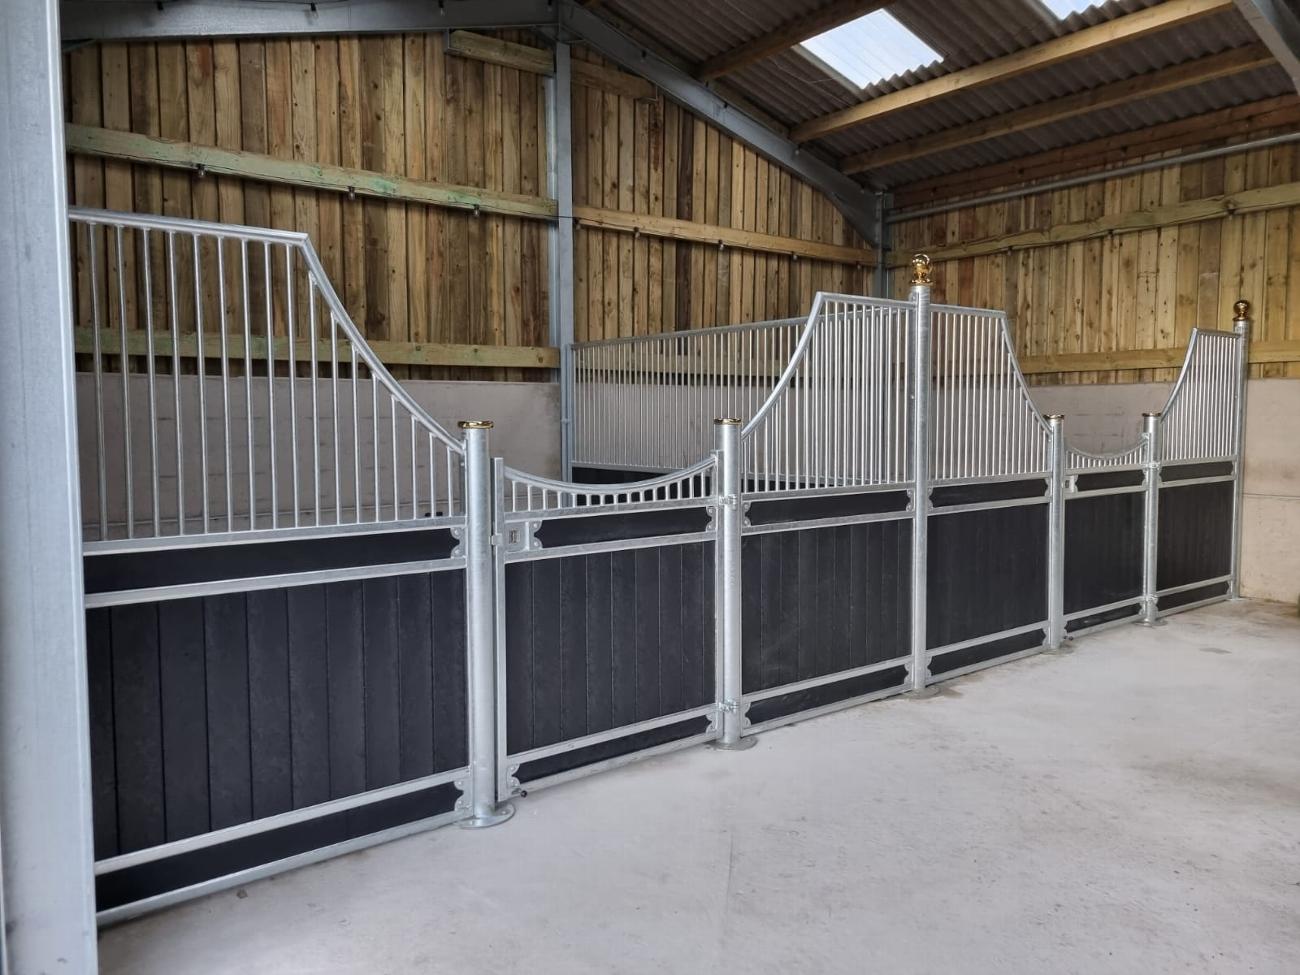 equestrian stables, barn stable manufacturers, arena construction, field shelters in Lancashire gallery image 5